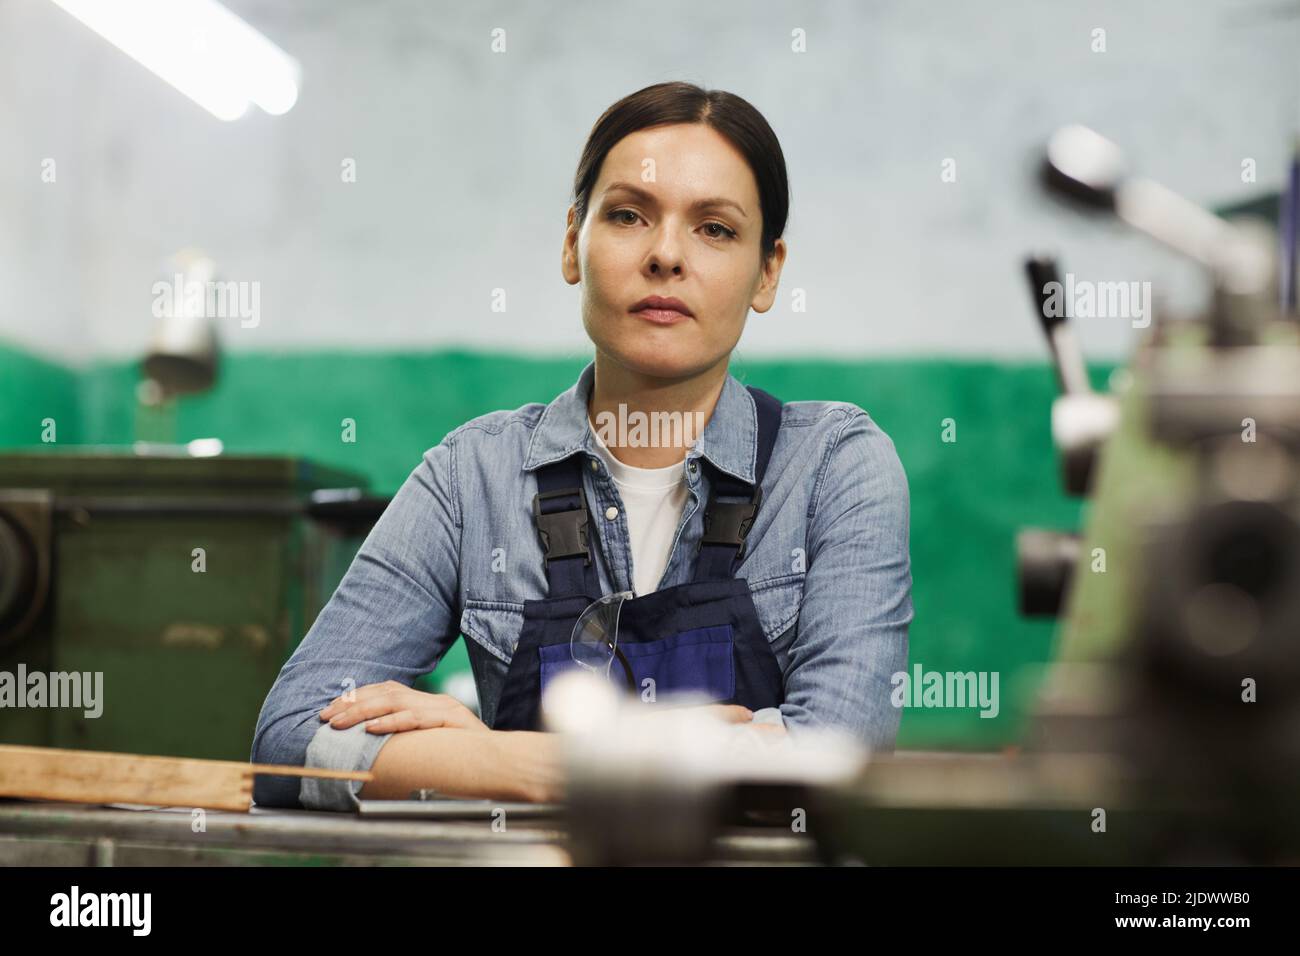 Portrait of serious tenacious lady engineer with brown hair leaning on table at factory workshop Stock Photo